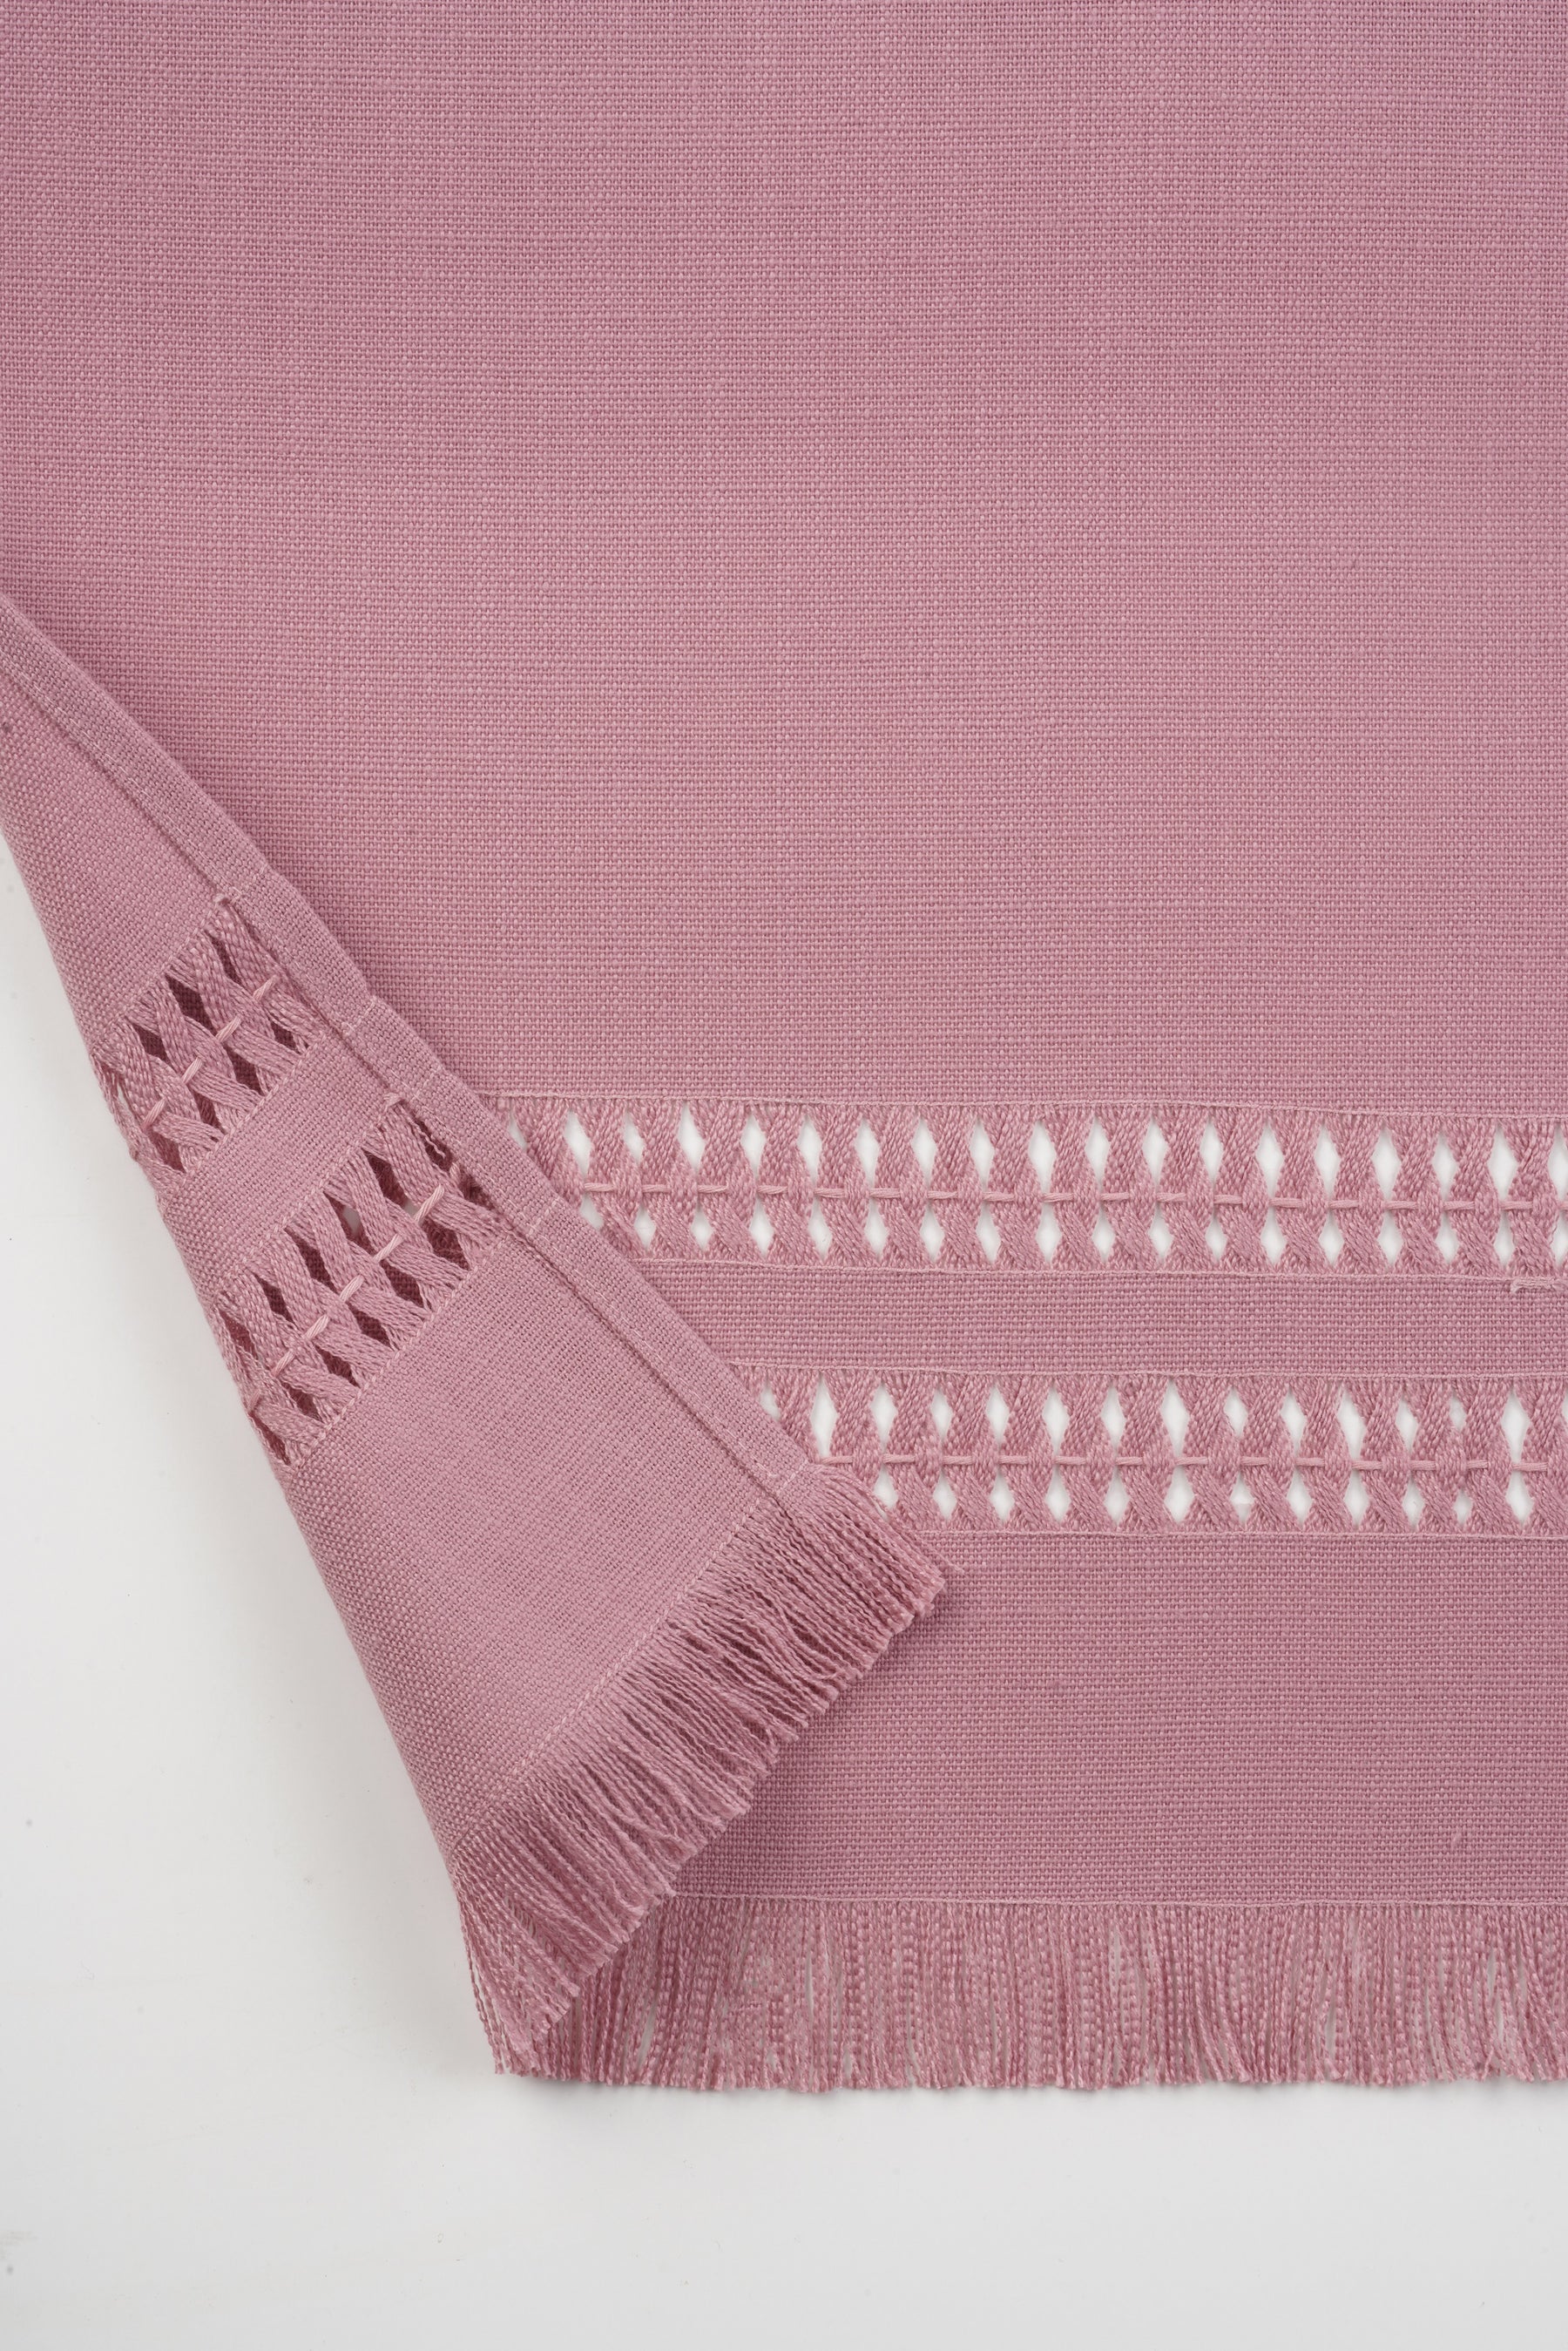 Blush Pink Linen Look Recycled Fabric Hand Hemstitch Table Runner